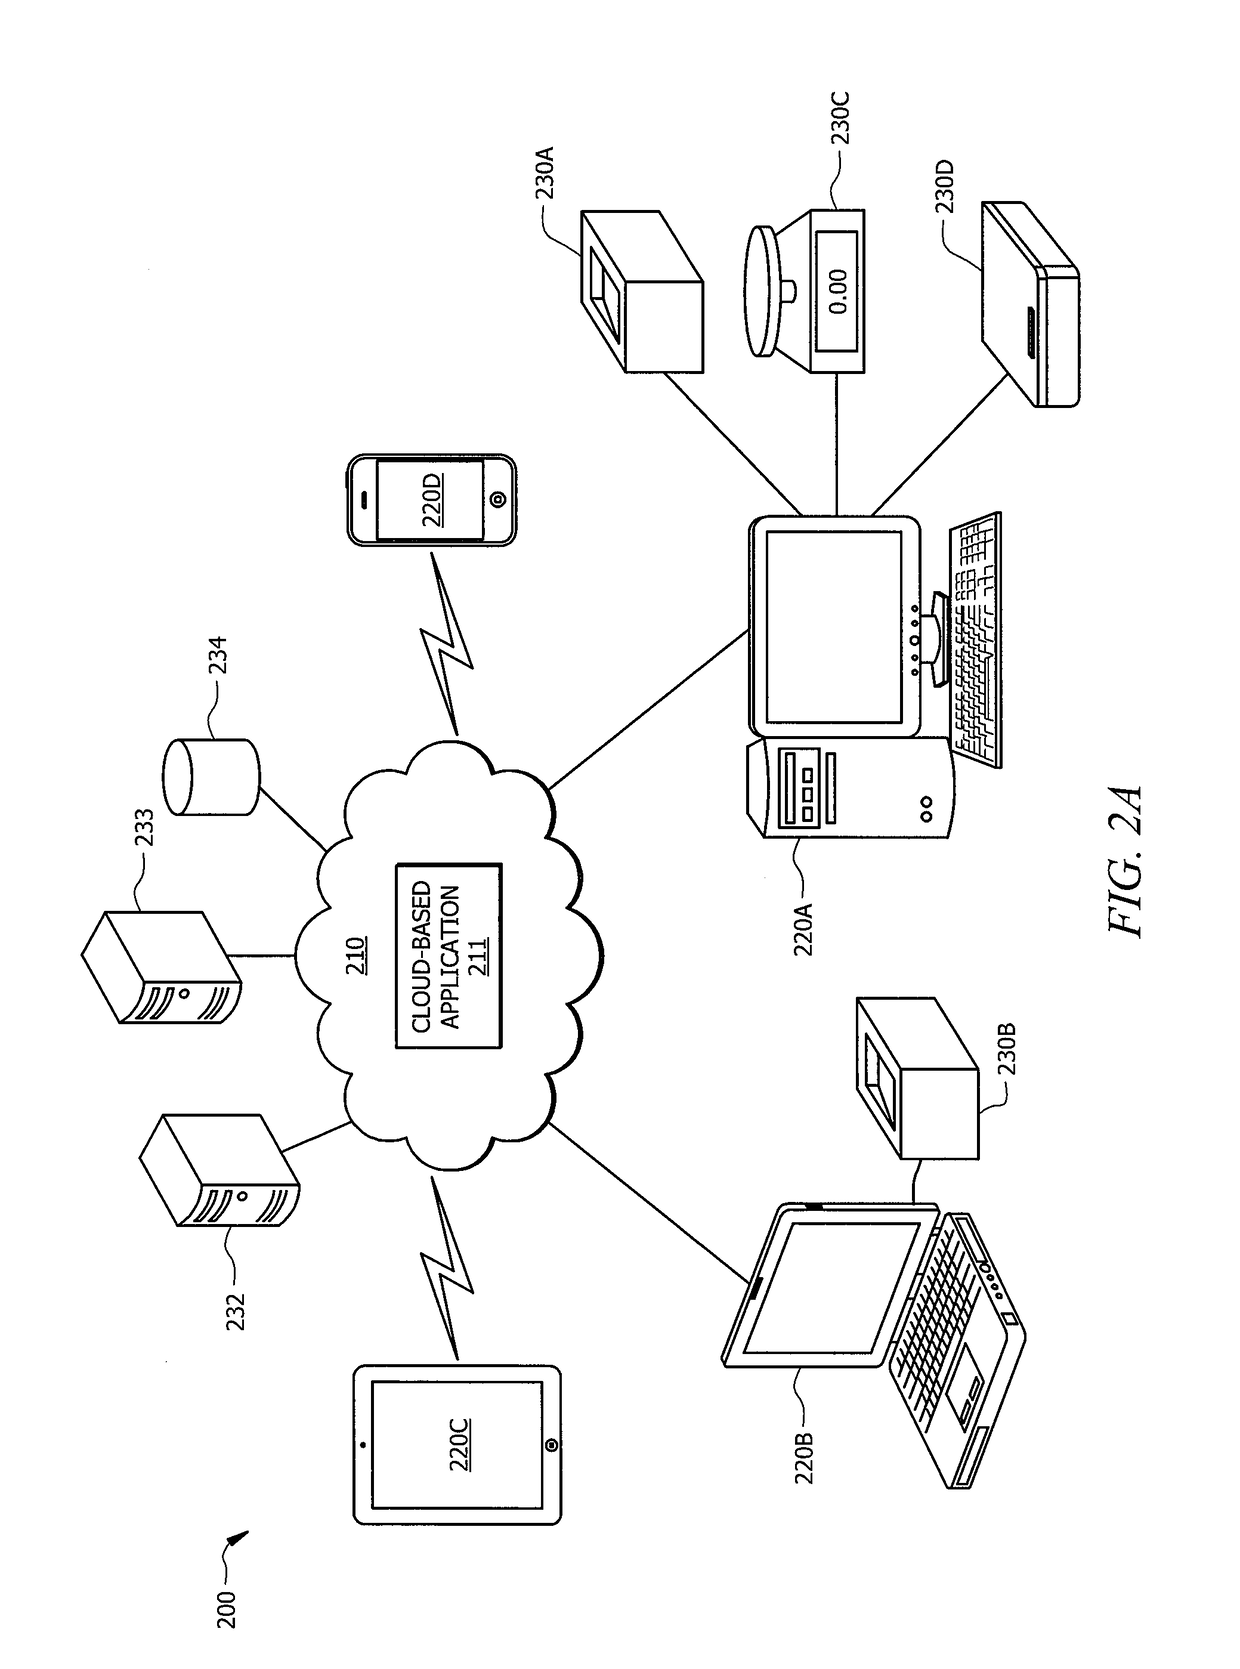 Systems and methods for cloud-based application access to resources